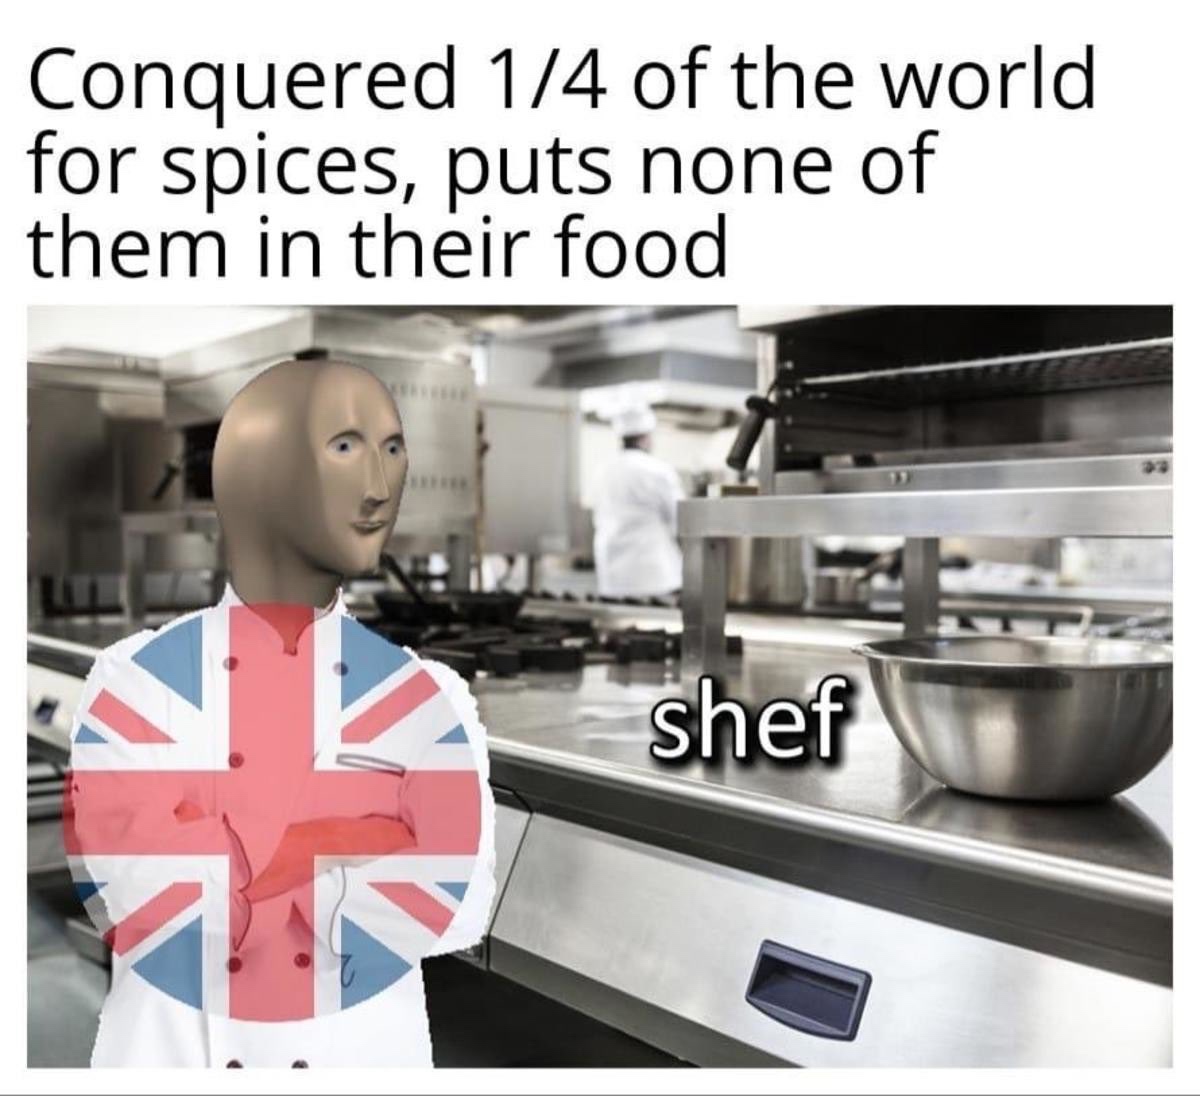 ww3 memes feminism - Conquered 14 of the world for spices, puts none of them in their food shef